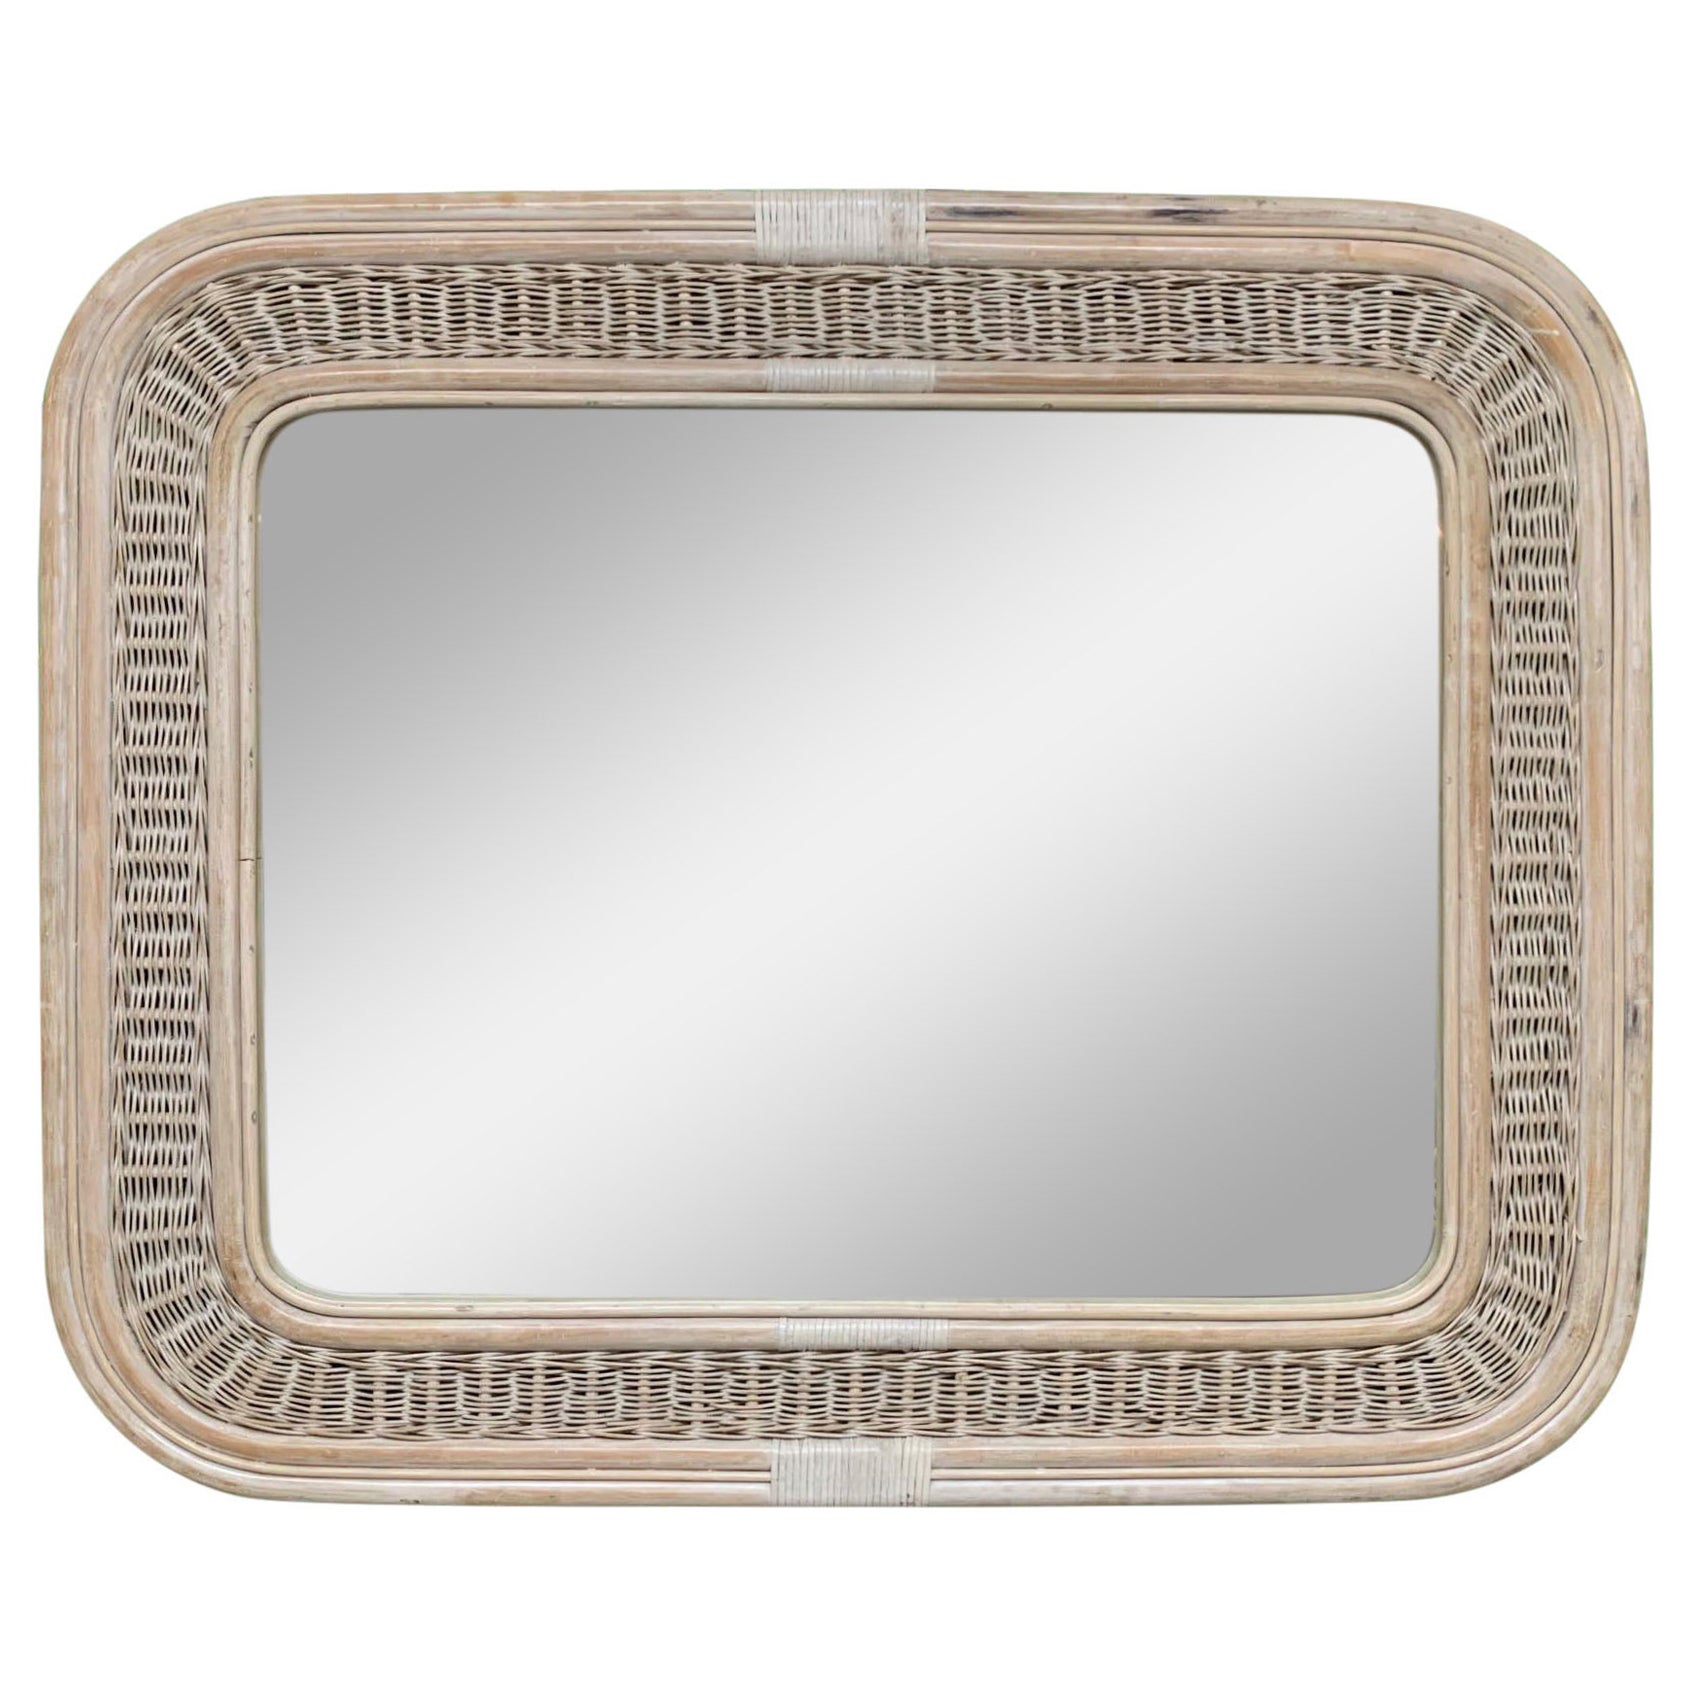 Rattan and Wicker Wall Mirror